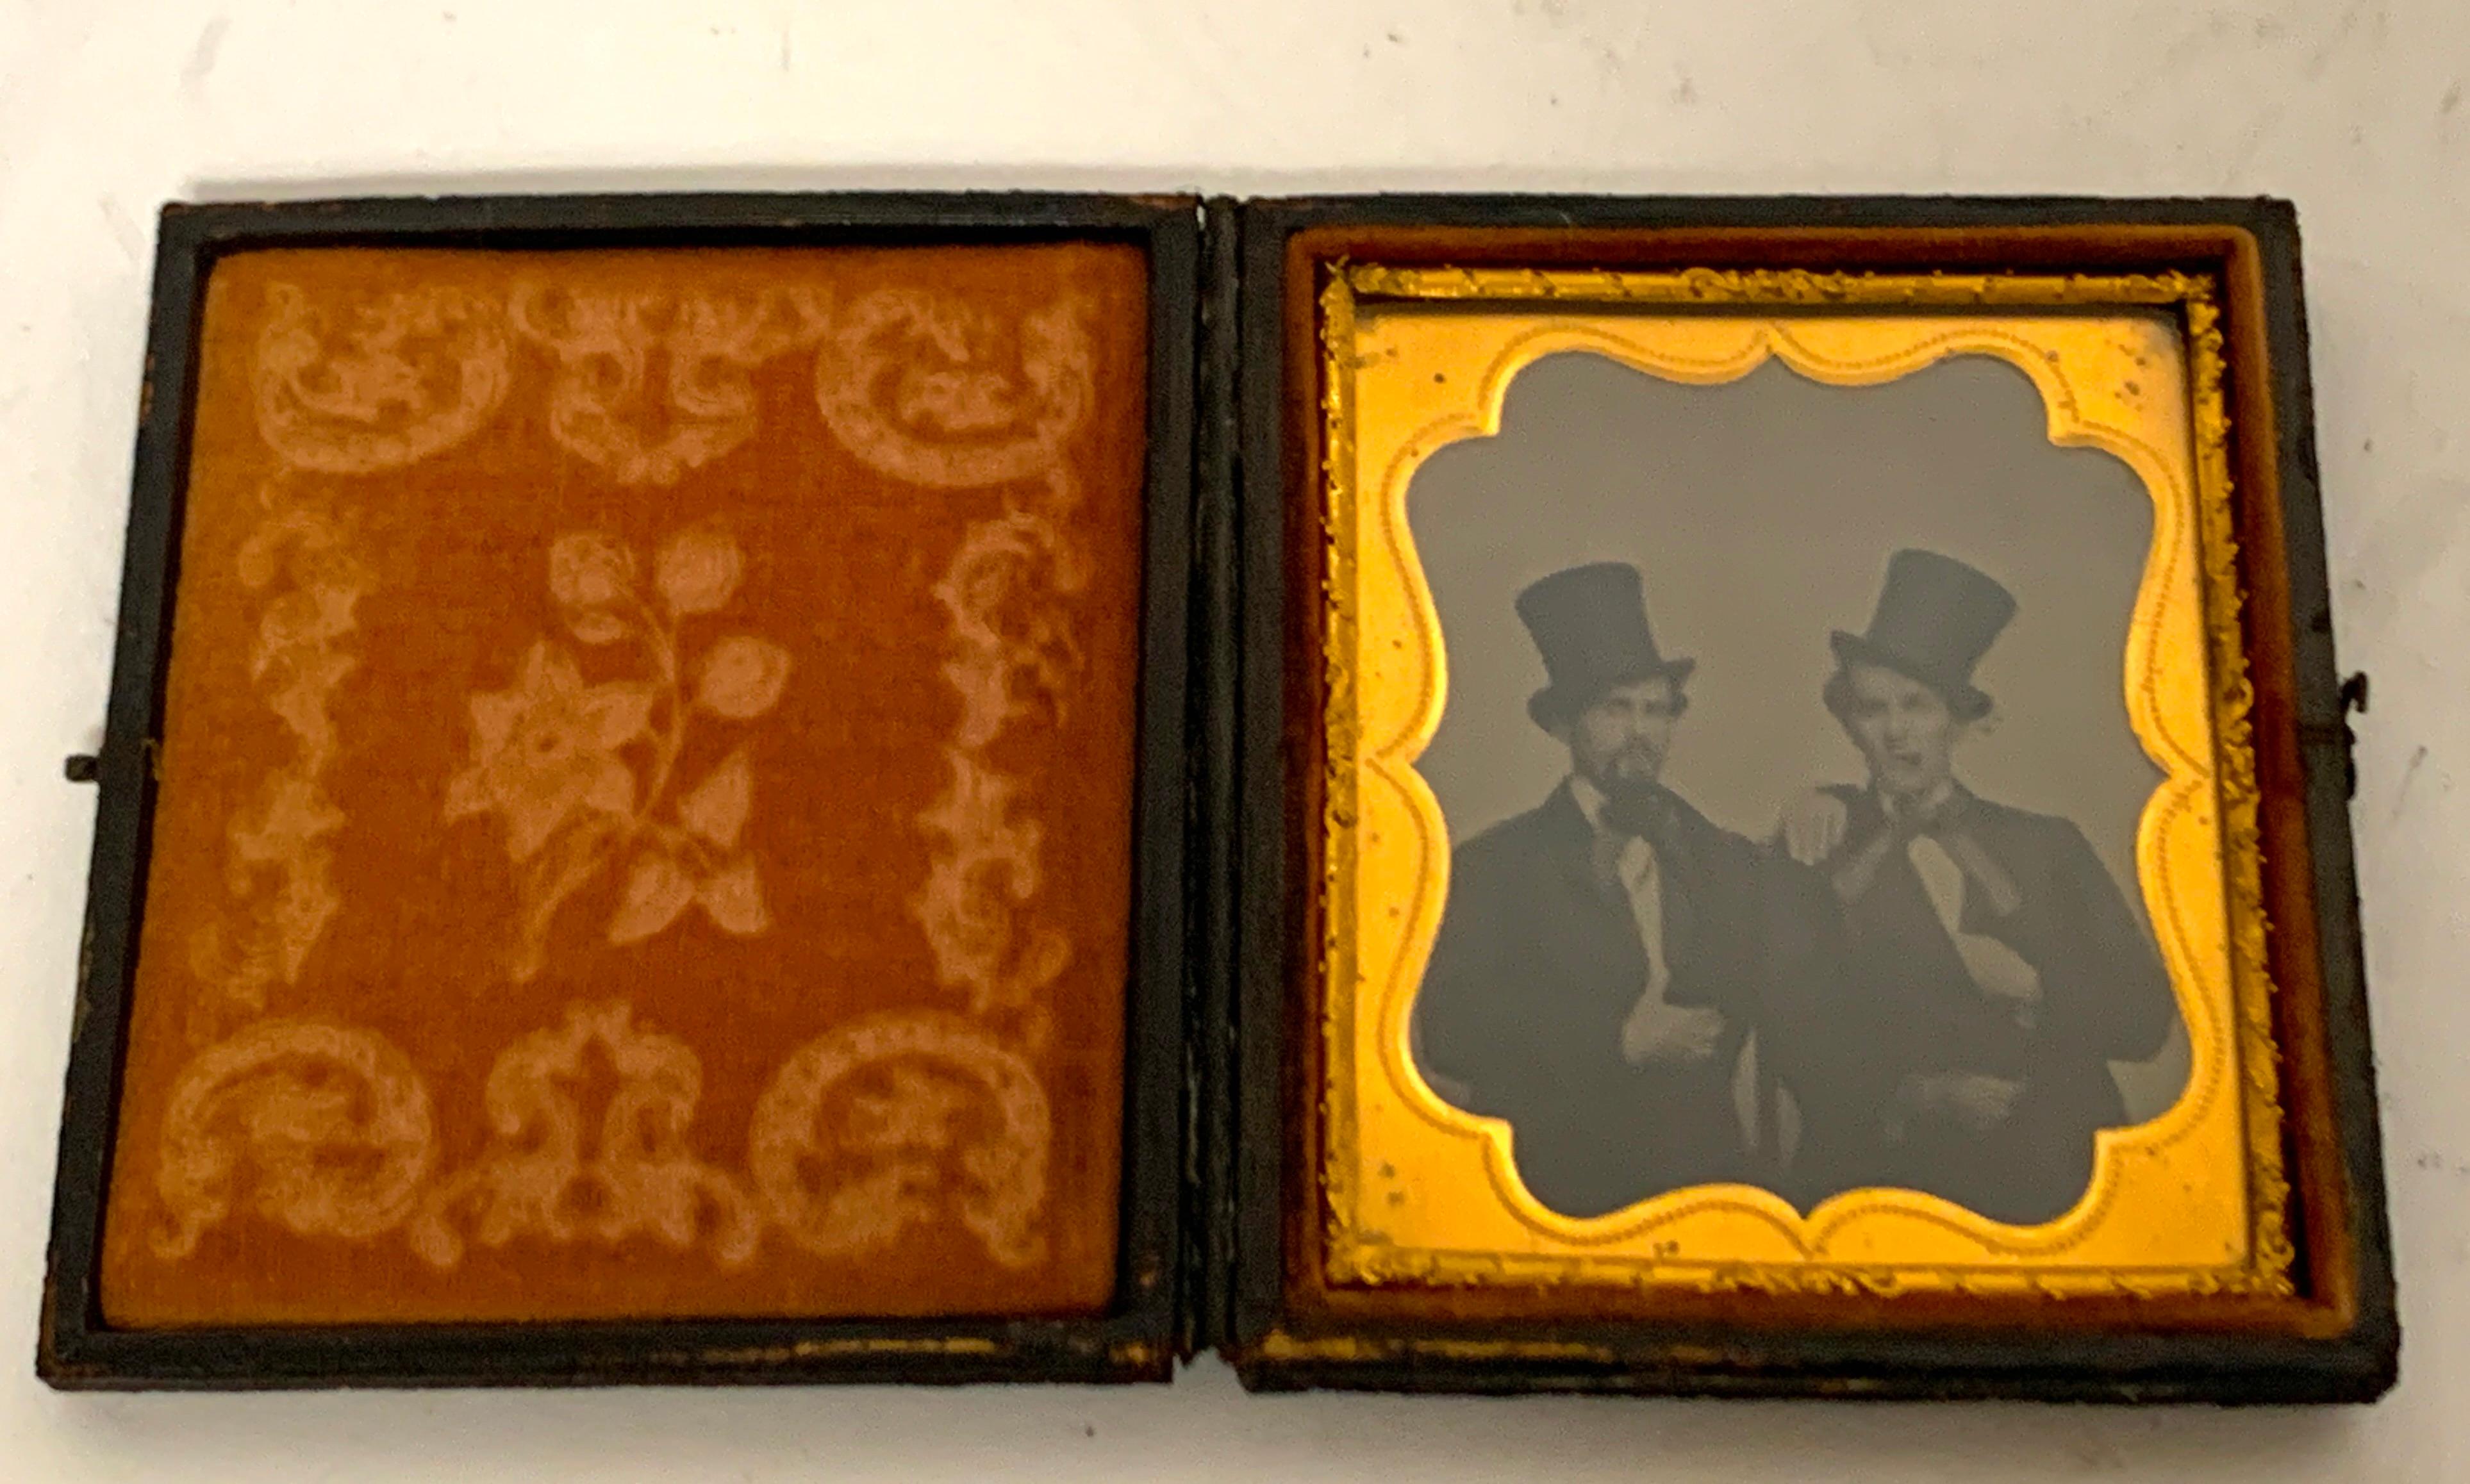 19th Century Daguerreotype Portrait of Two Men Embracing, Smoking with Ties and Top Hats For Sale